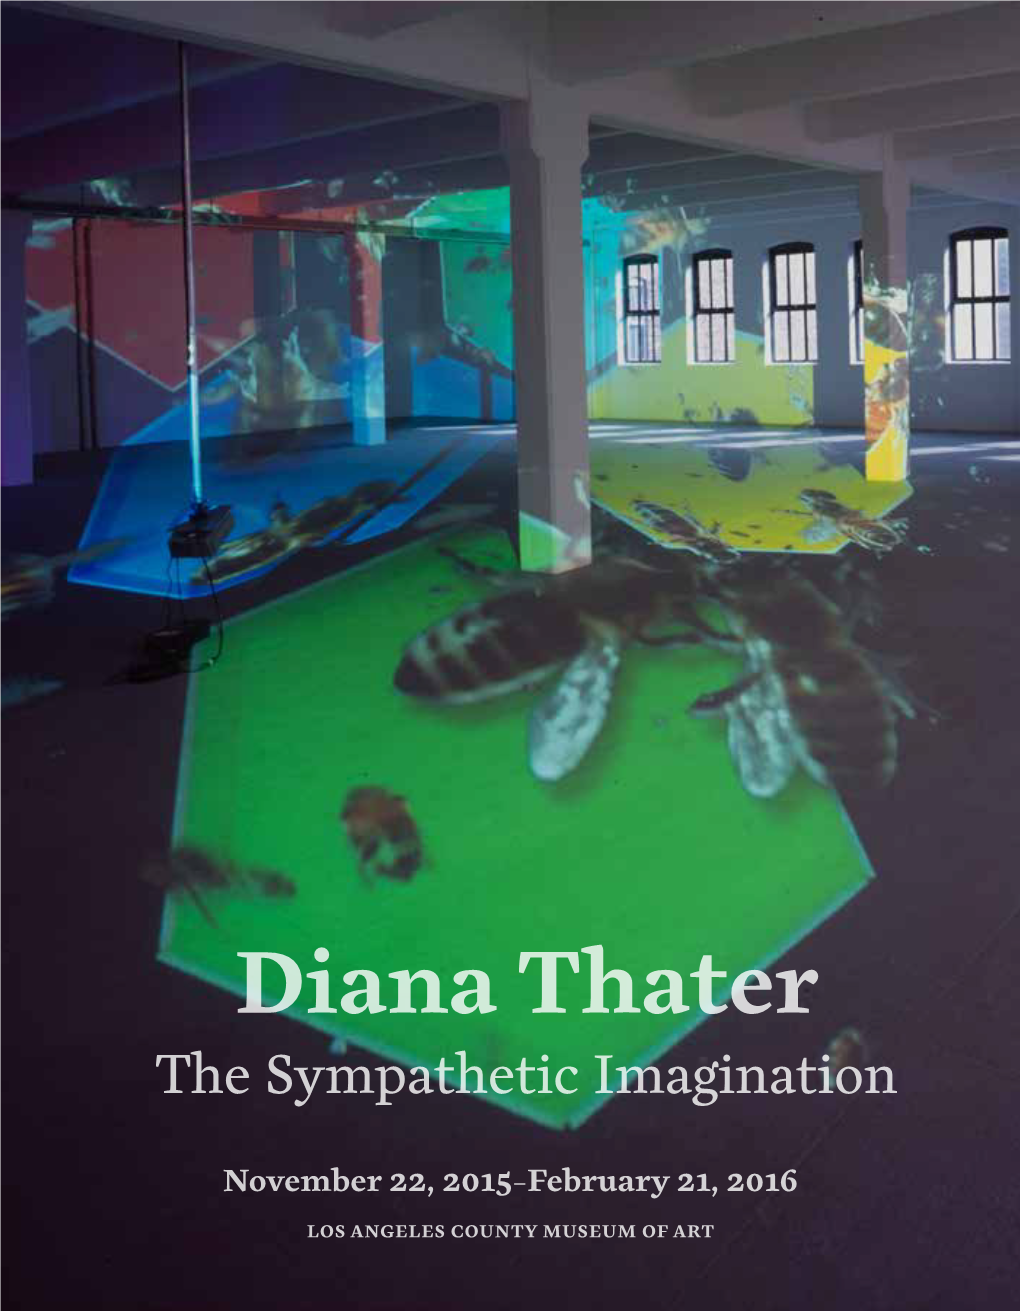 Diana Thater the Sympathetic Imagination